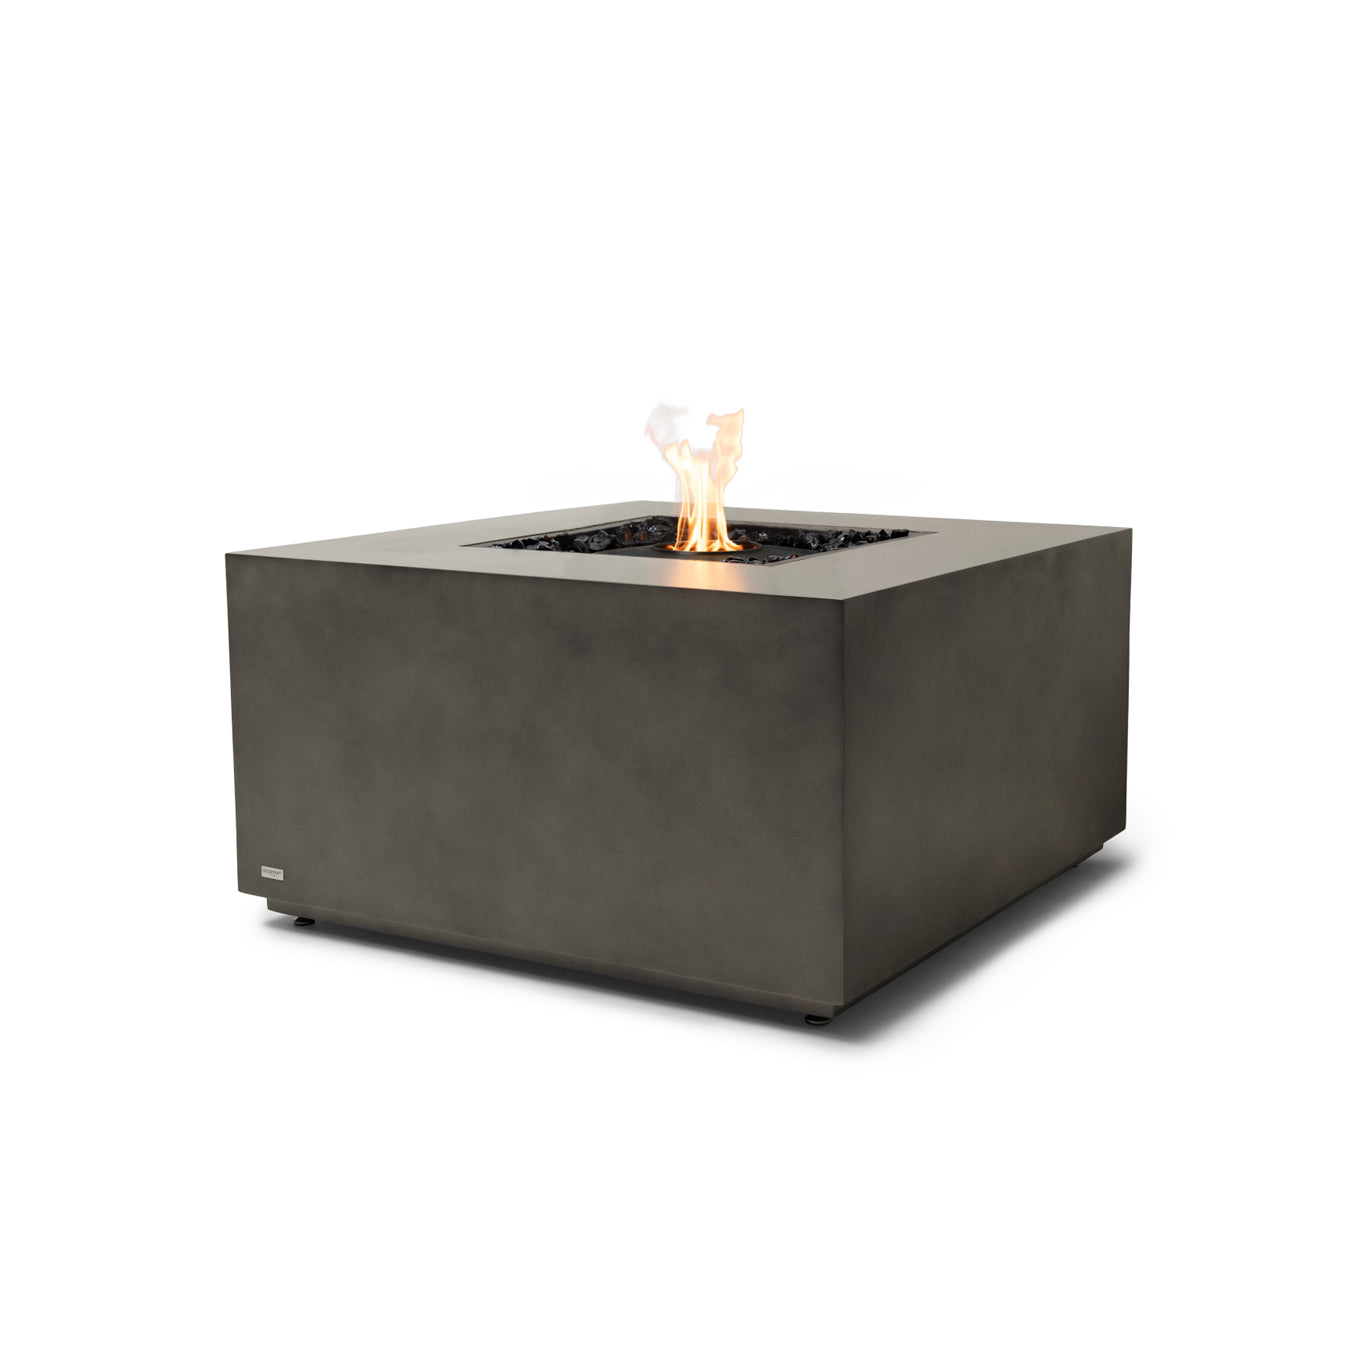 CHASER 38 FIRE PIT TABLE - ETHANOL